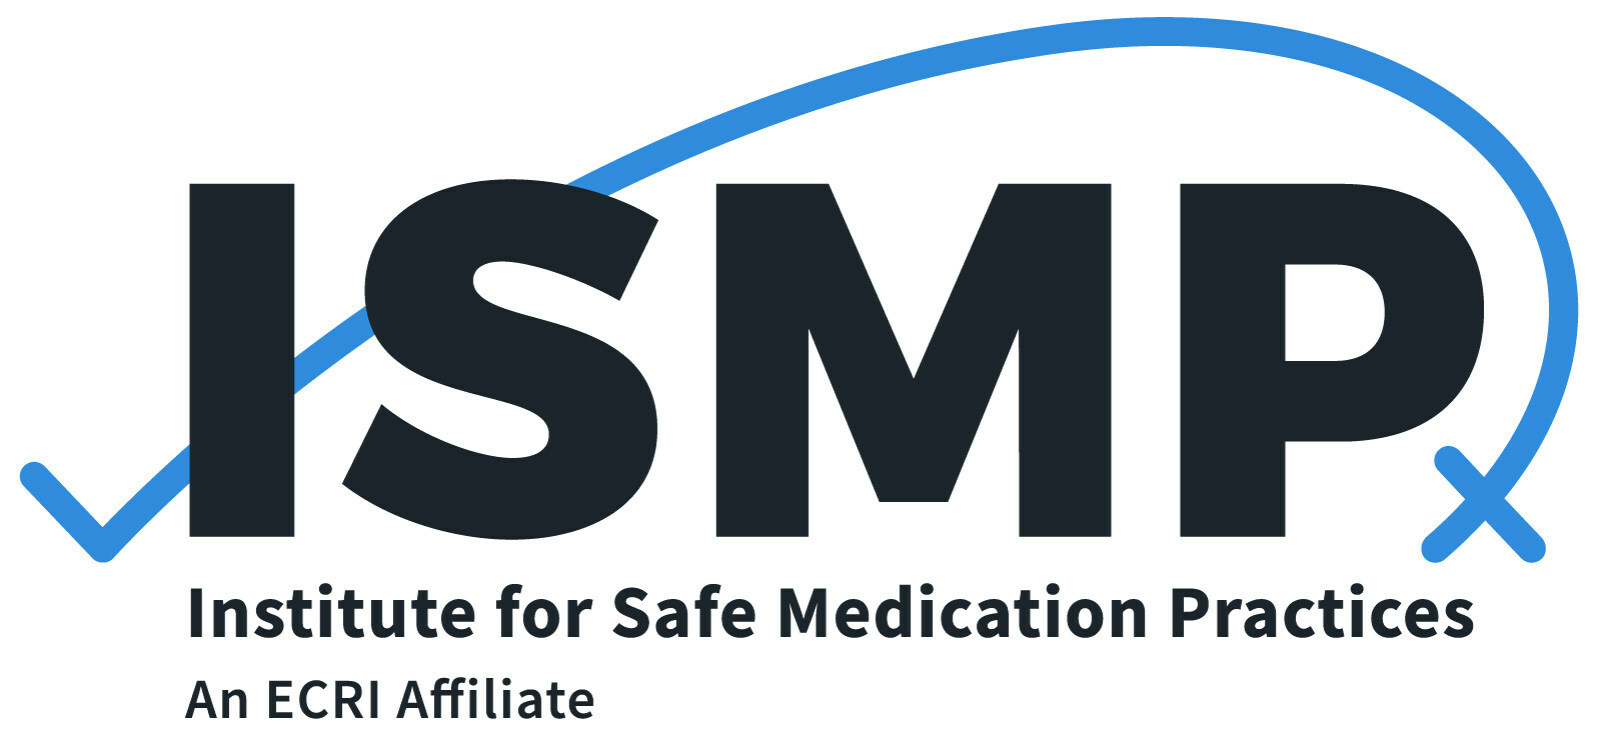 The Institute for Safe Medication Practices (ISMP) is the only 501c (3) nonprofit organization devoted entirely to preventing medication errors. ISMP is known and respected as the gold standard for medication safety information and has served as a vital force for advancing safe medication use.